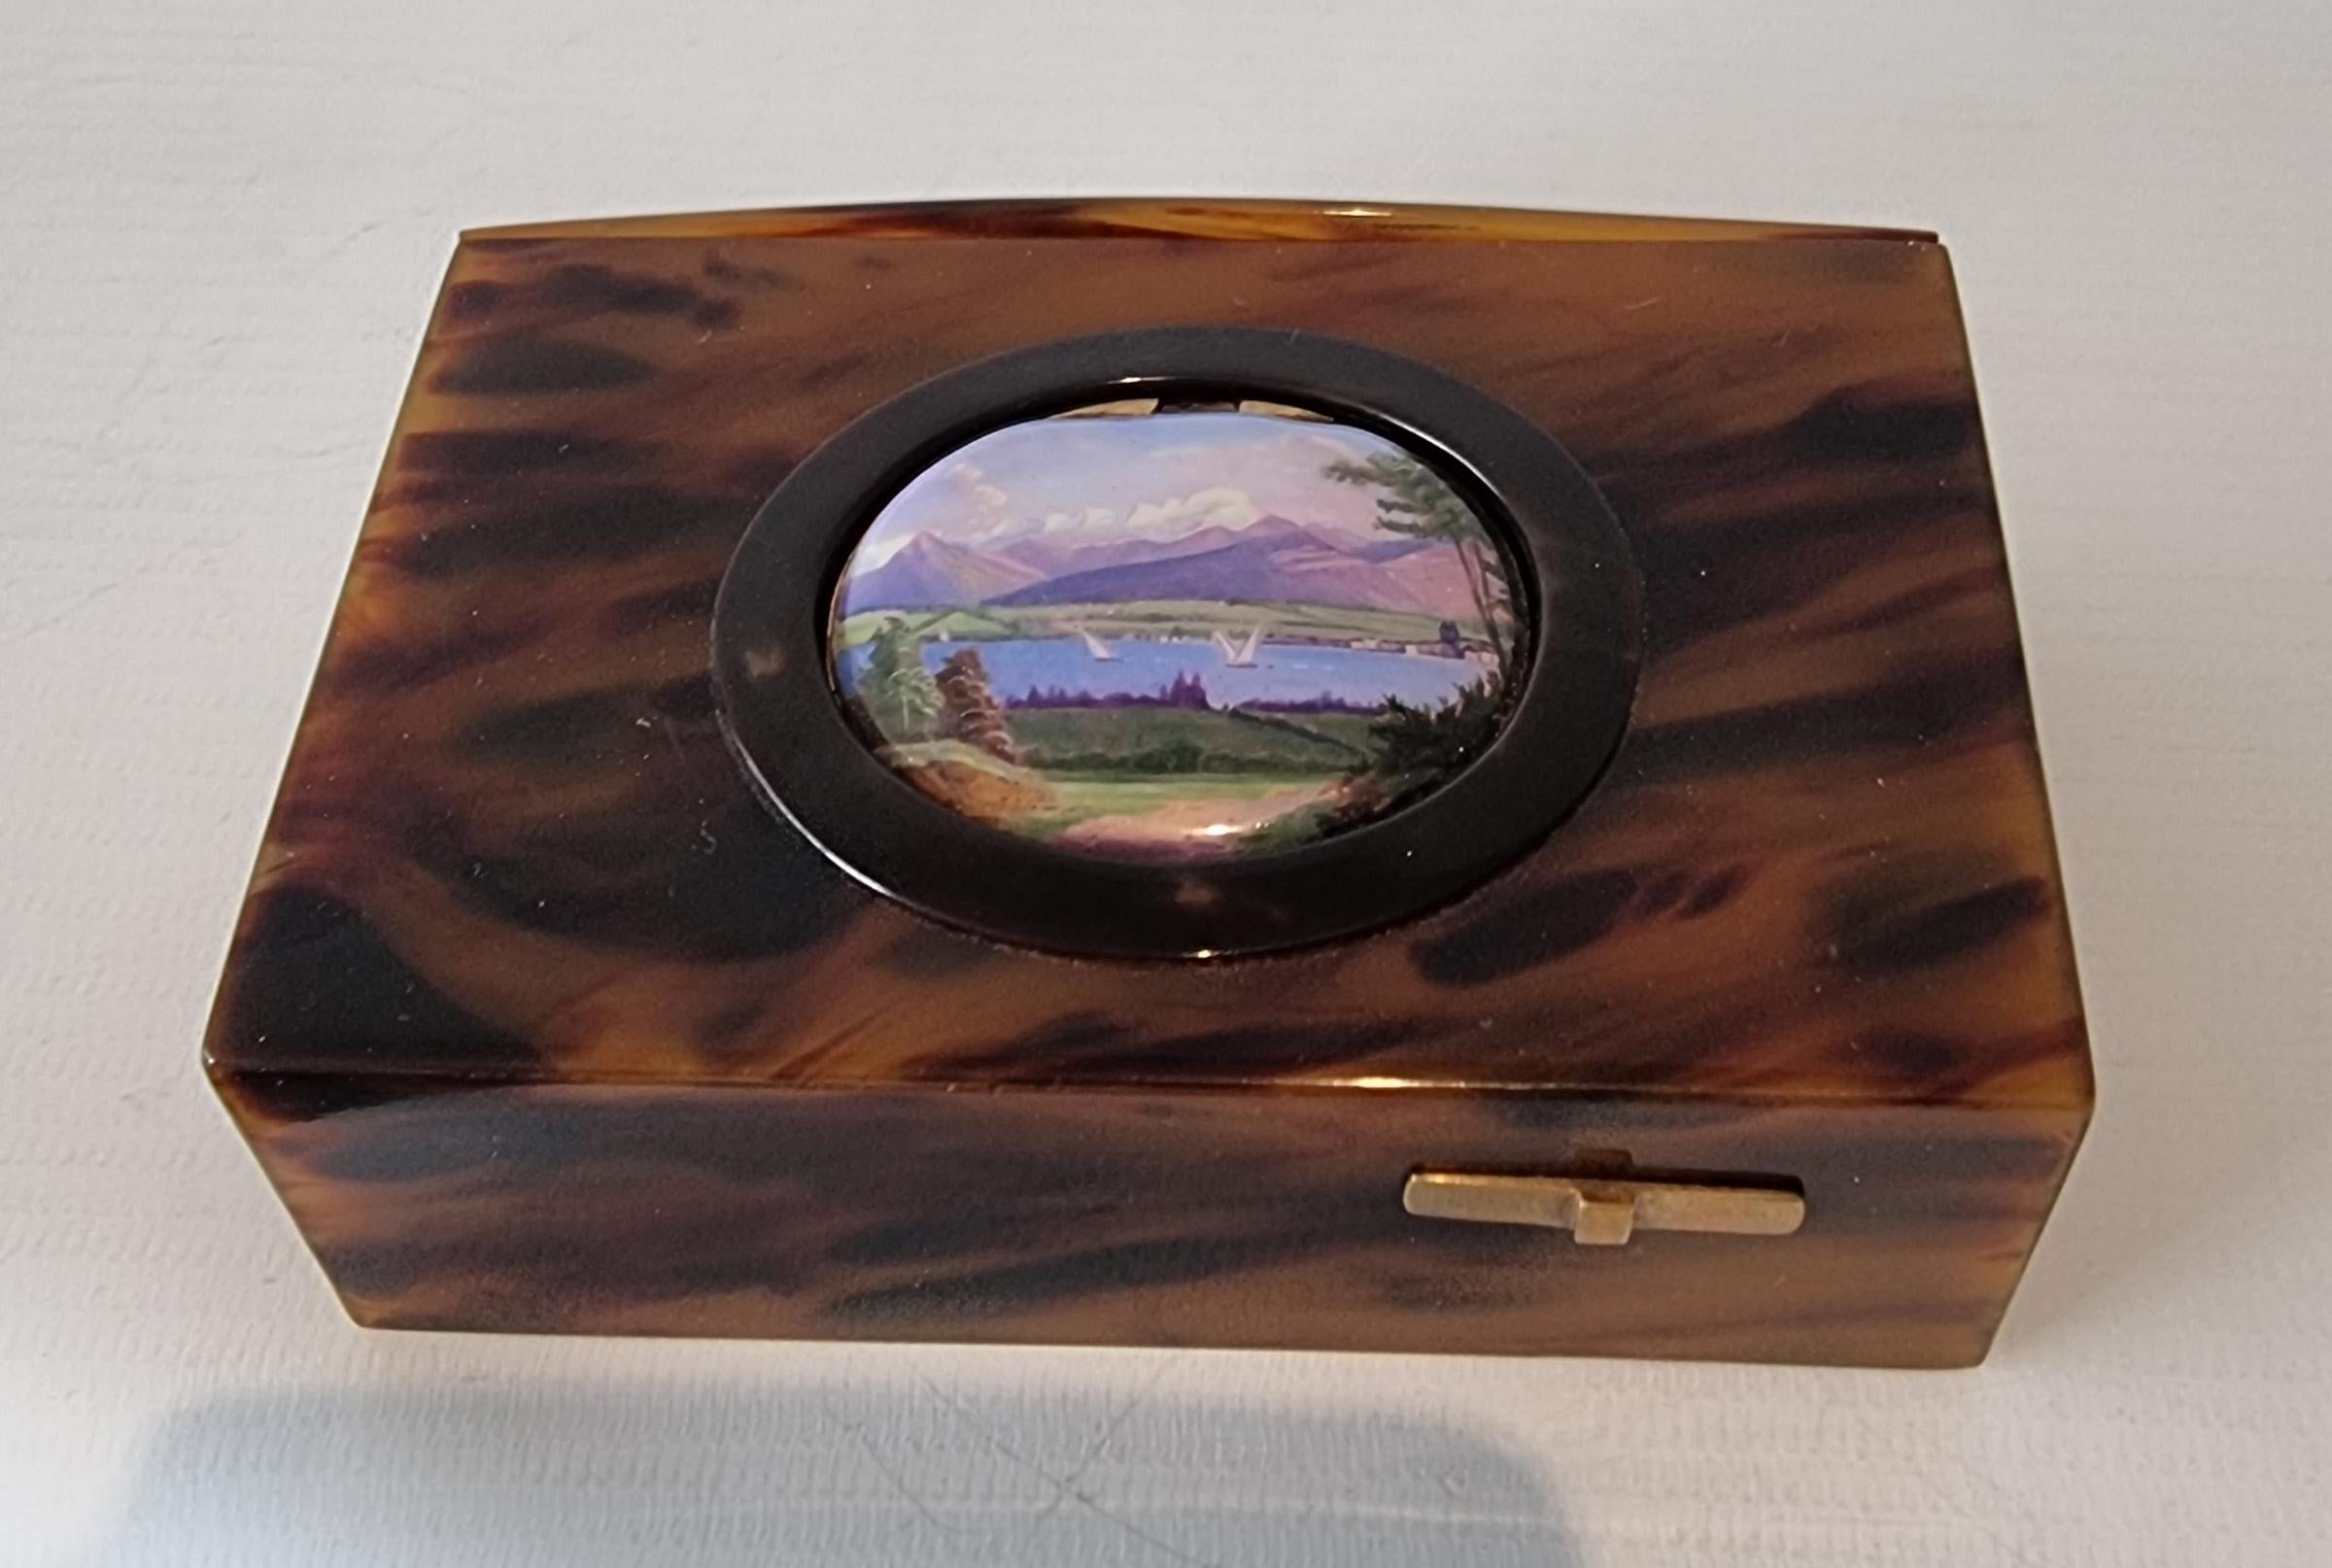 A fine antique pictorial enamel and underbelly-cut tortoiseshell singing bird box,

Circa 1910,

Going-barrel movement,

Soft streaks of light throughout this fabulous case...

When wound and start/stop slide moved to the right, the bird emerges